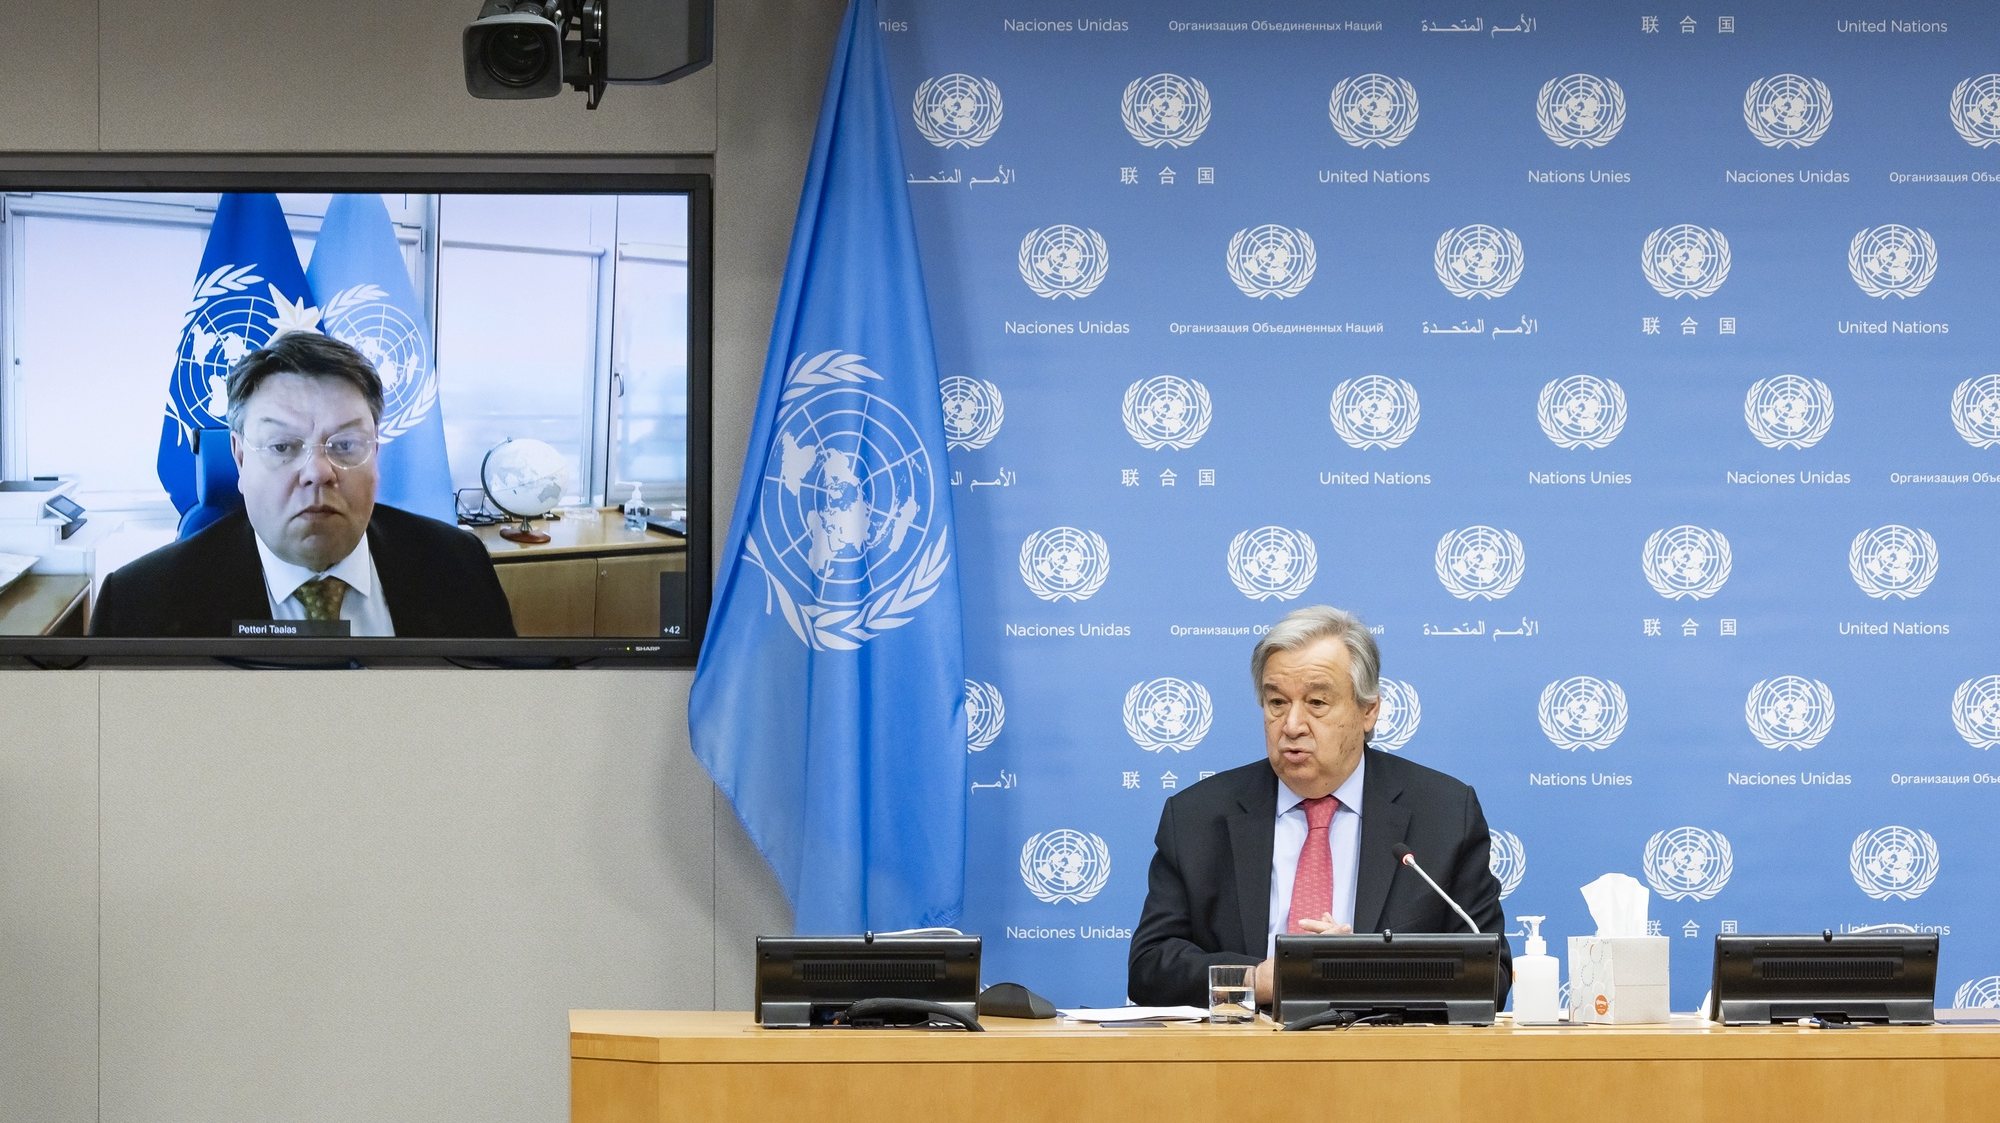 epa09145838 United Nations Secretary-General Antonio Guterres (R) speaks during a partially virtual press conference with Professor Petteri Taalas (L), the Secretary-General of the World Meteorological Organization, about the report ‘State of the Global Climate in 2020’ at United Nations headquarters in New York, New York, USA, 19 April 2021. The report details a number of facts about the global climate including that 2020 was one of the hottest years on record and that the temporary decrease in carbon emissions as a result of the coronavirus pandemic had minimal affect on the concentration of greenhouse gases in the atmosphere.  EPA/JUSTIN LANE